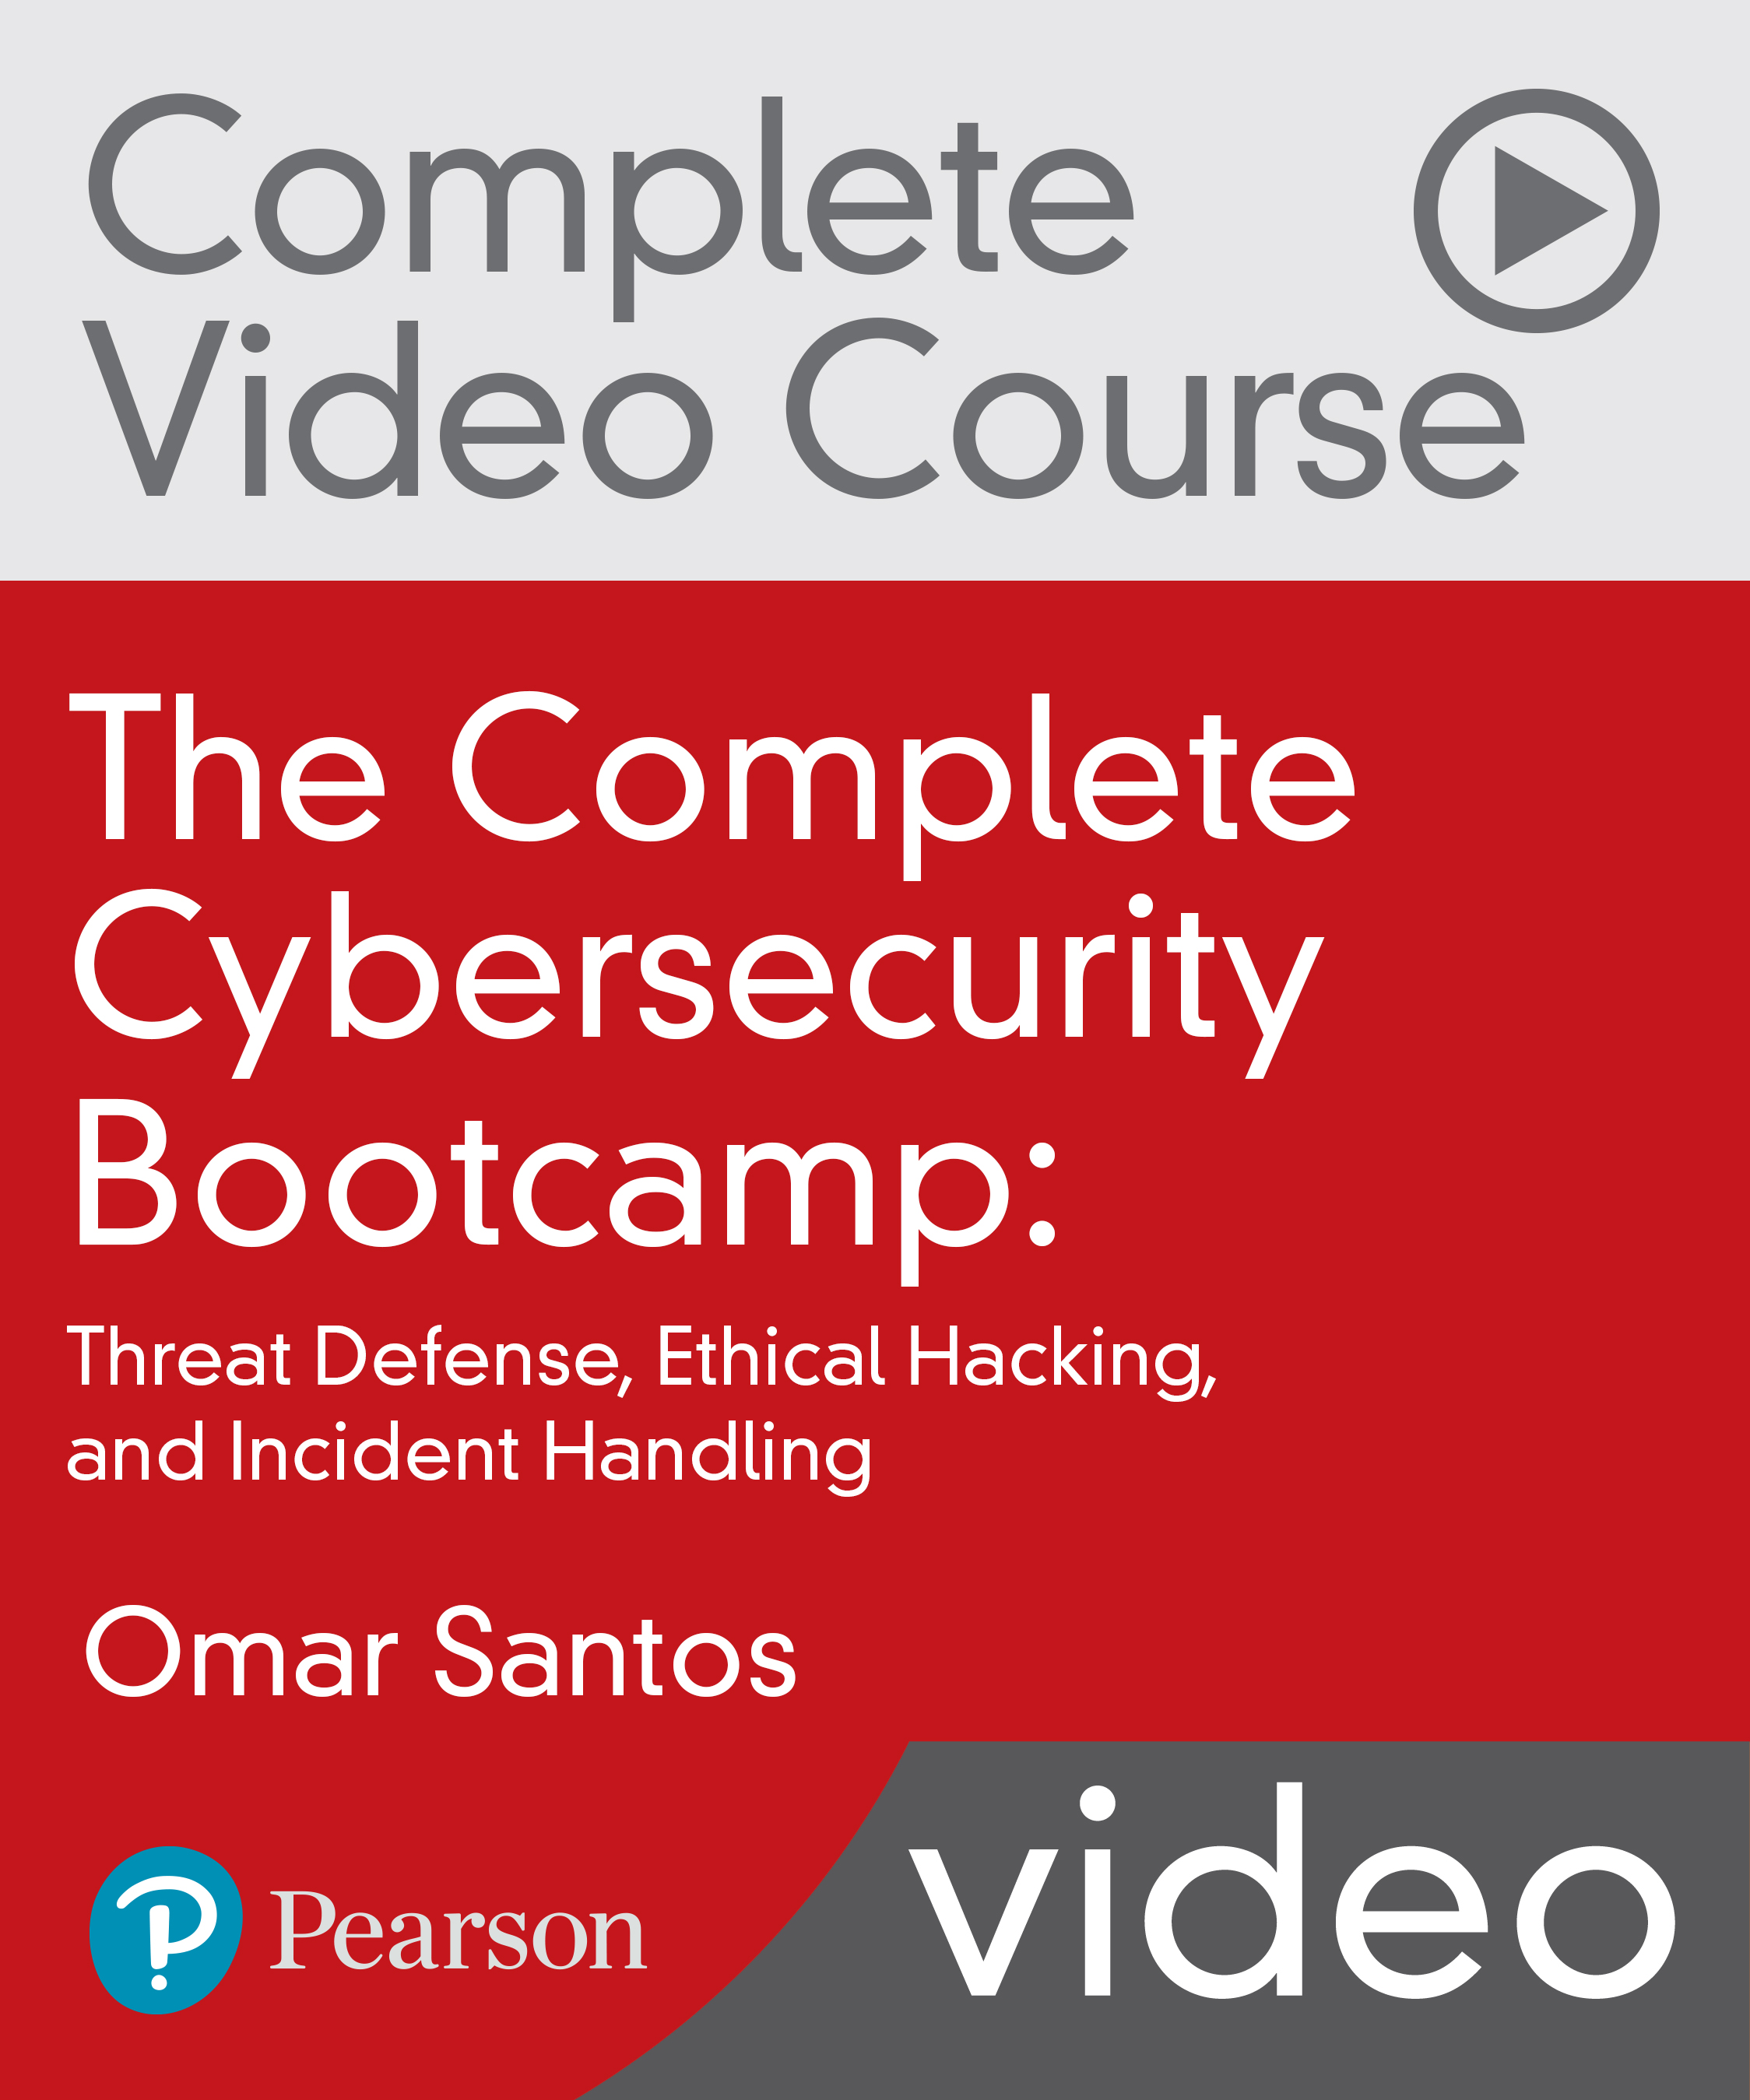 The Complete Cybersecurity Bootcamp: Threat Defense, Ethical Hacking, and Incident Handling